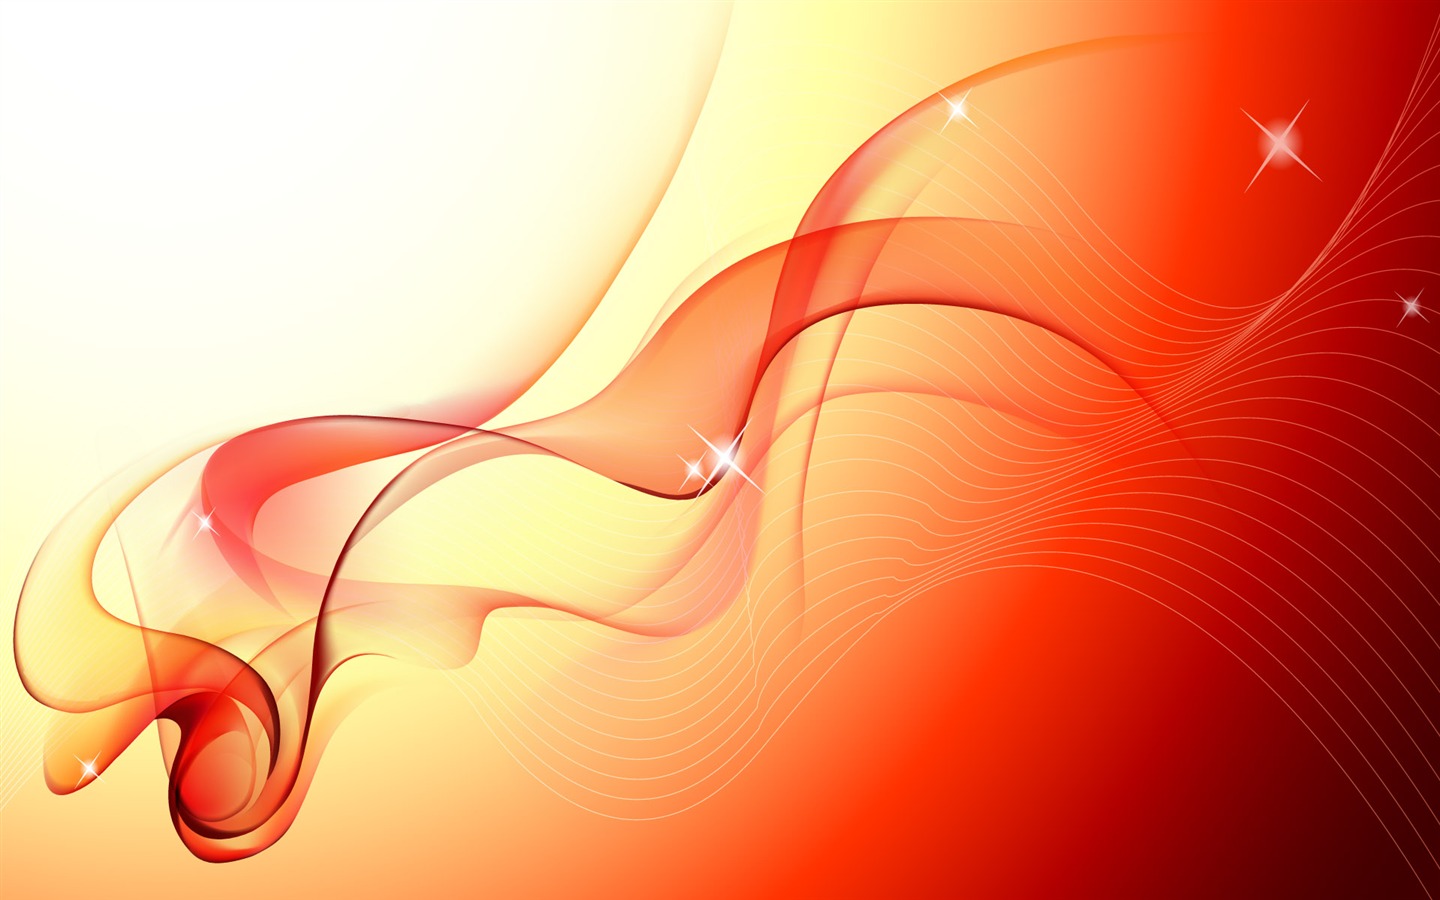 Colorful vector background wallpaper (1) #19 - 1440x900